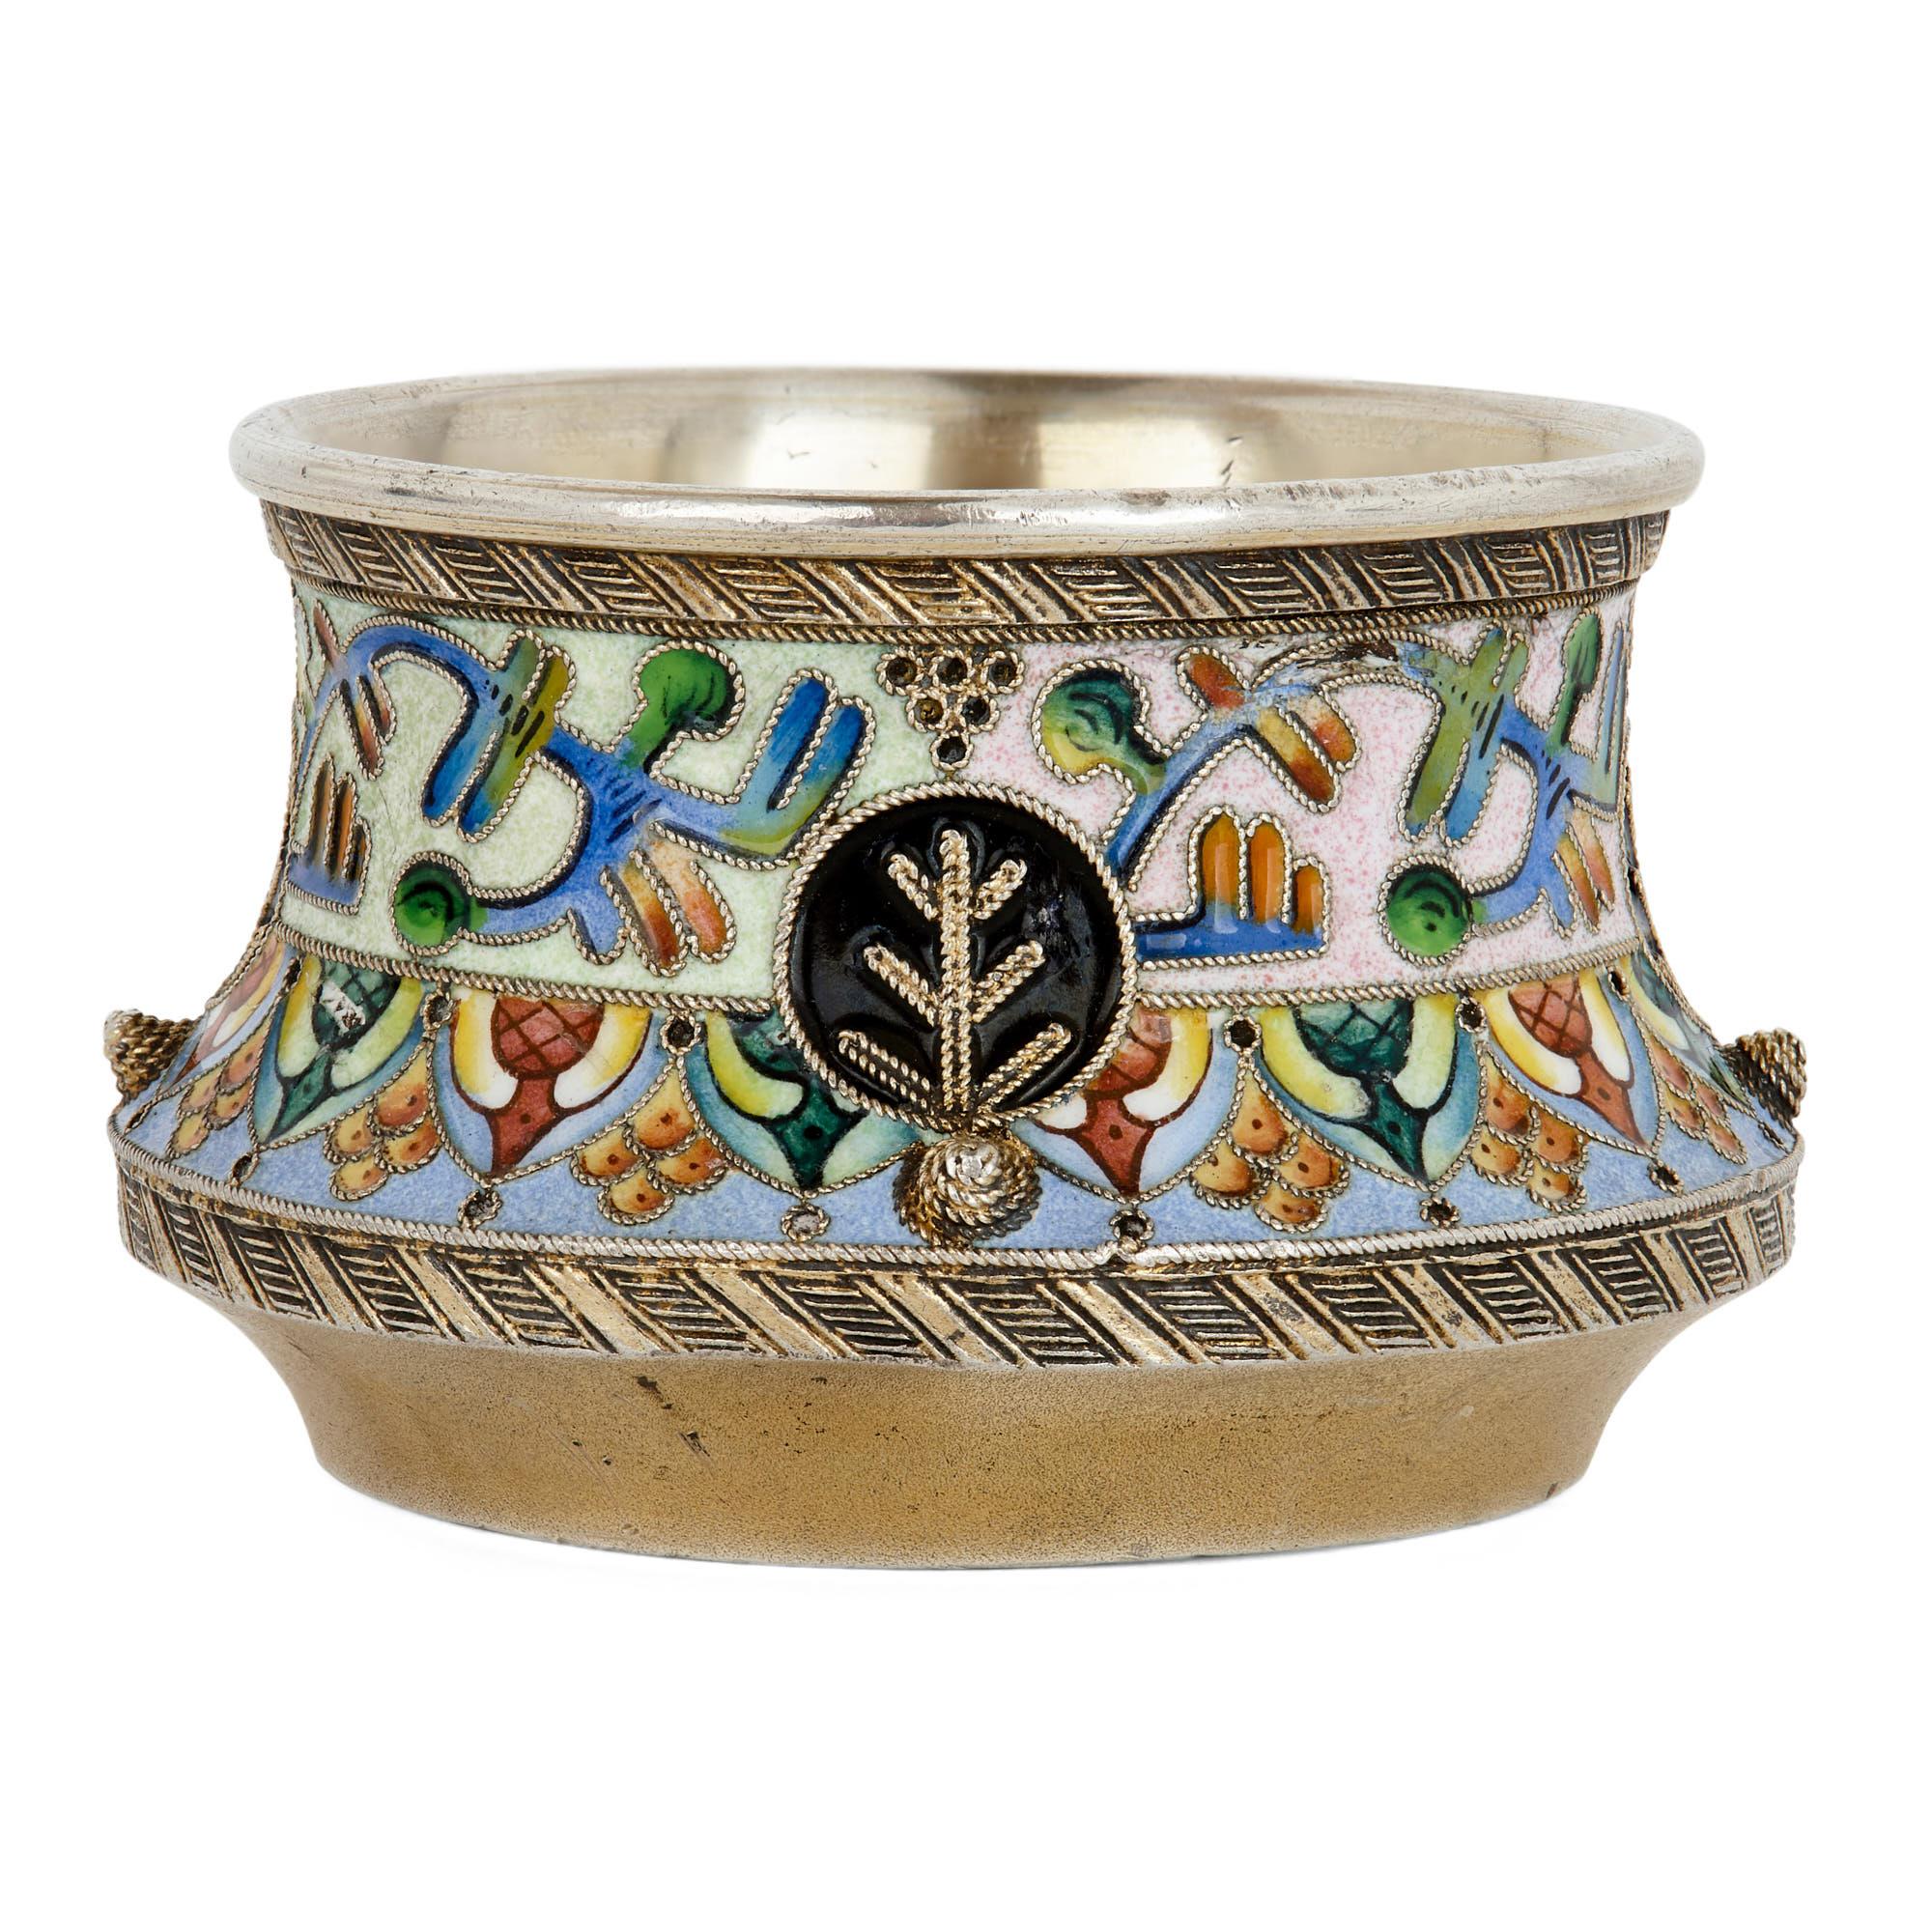 A Salt is a decorative but perfectly functional salt cellar. During the early 20th century, Russian artisans used the form of the Salt, much like they did the Kovsh, as a means of demonstrating their technical skill. This Salt, which was crafted in